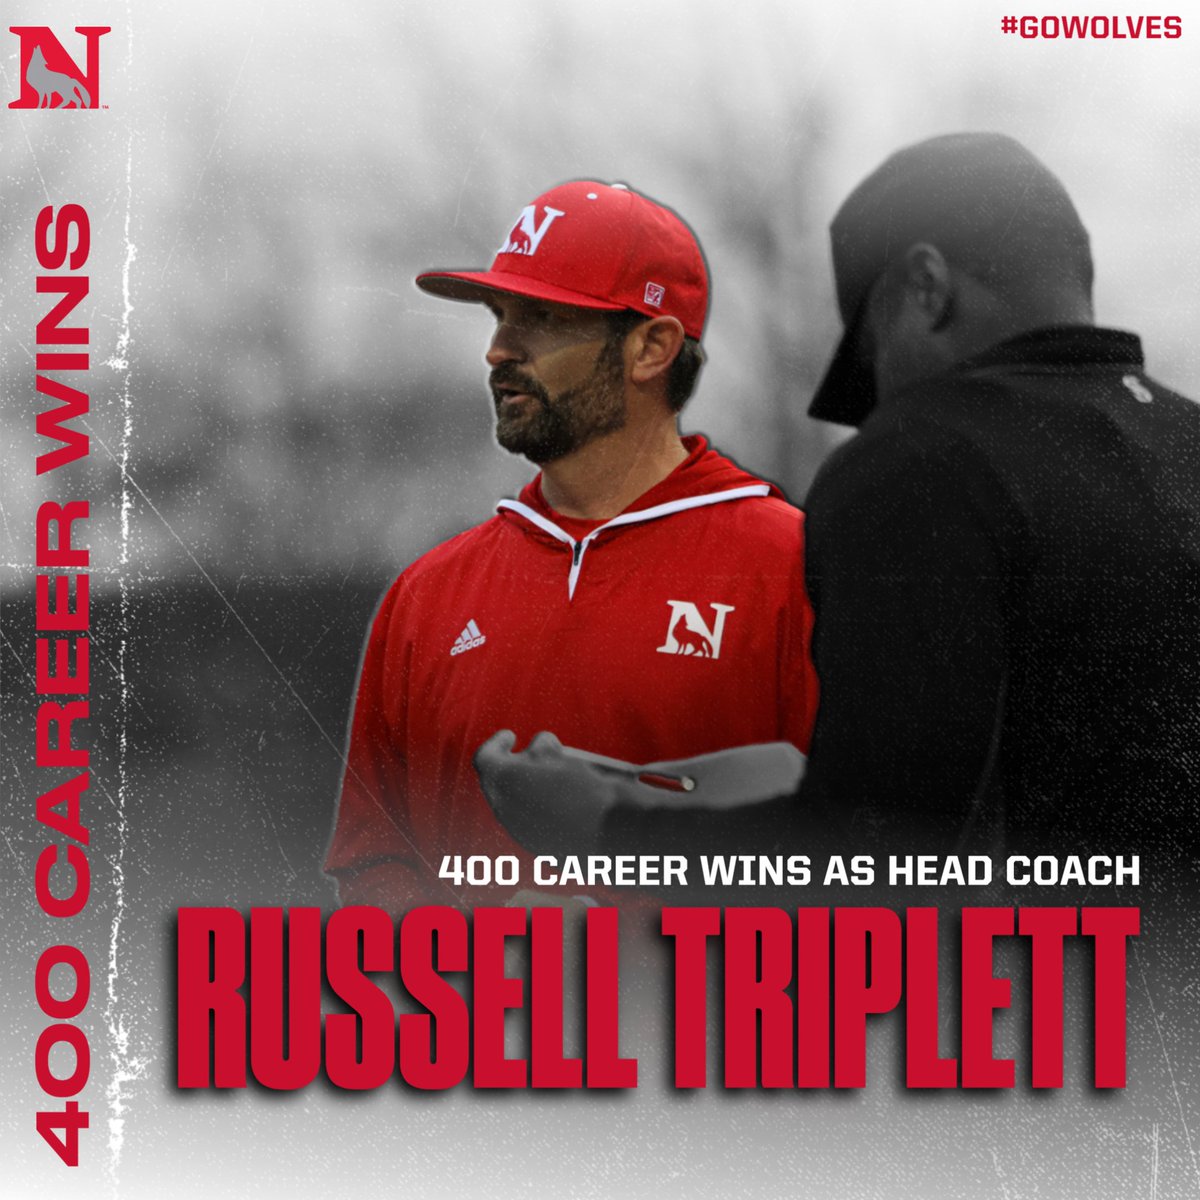 BSB: Wolves Win! With the 13-8 win over USC Aiken, Head Coach Russell Triplett has reached the 400 mark in career wins as a head coach at Newberry College! Congrats to Coach Tripp! #GoWolves